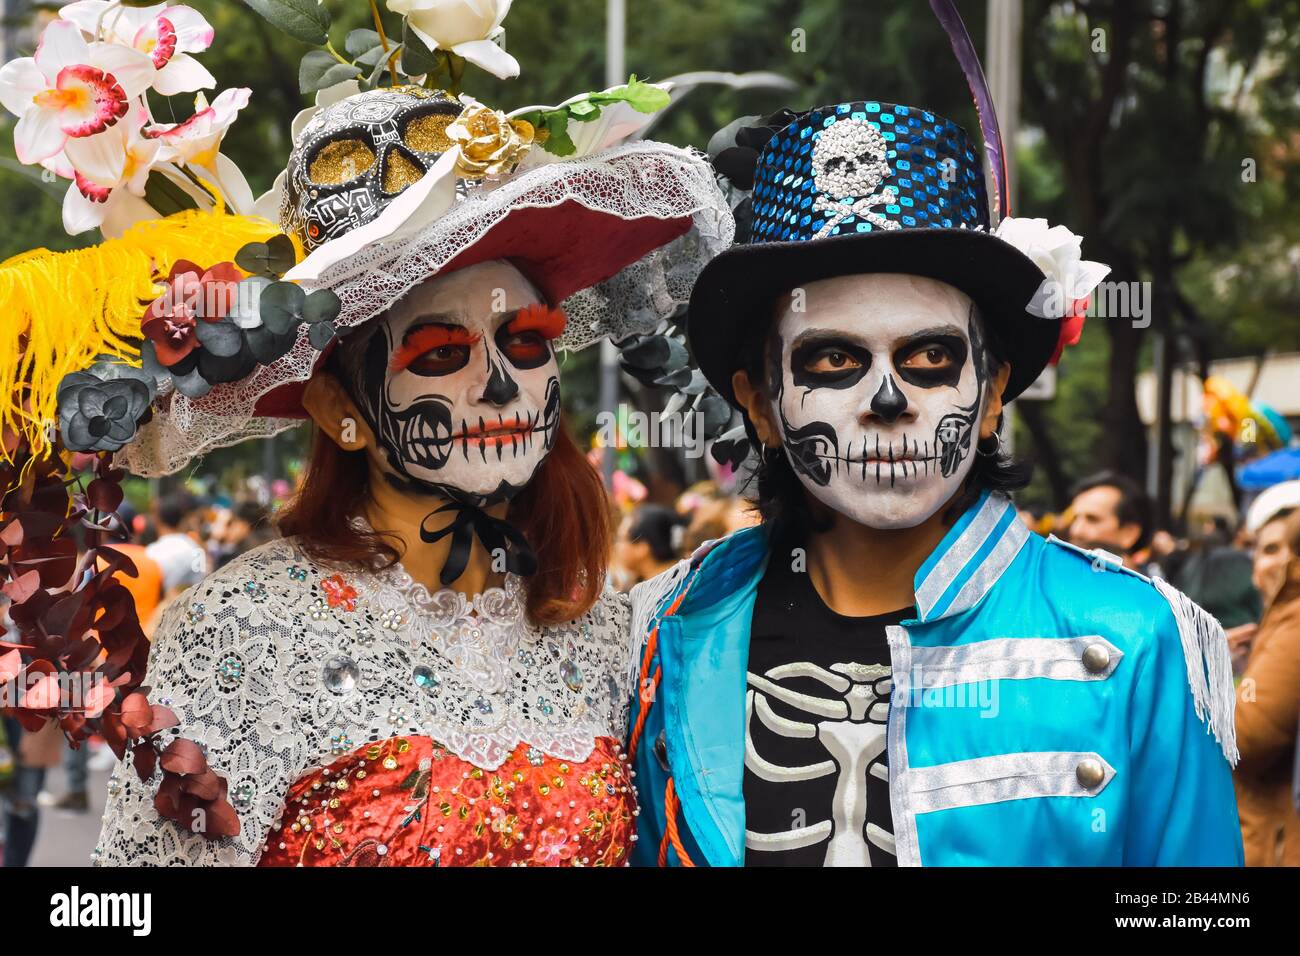 Mexico City, Mexico, ; October 26 2019: Disguised couple at the Parade of catrinas at the Day of the Dead celebrations in Mexico City Stock Photo